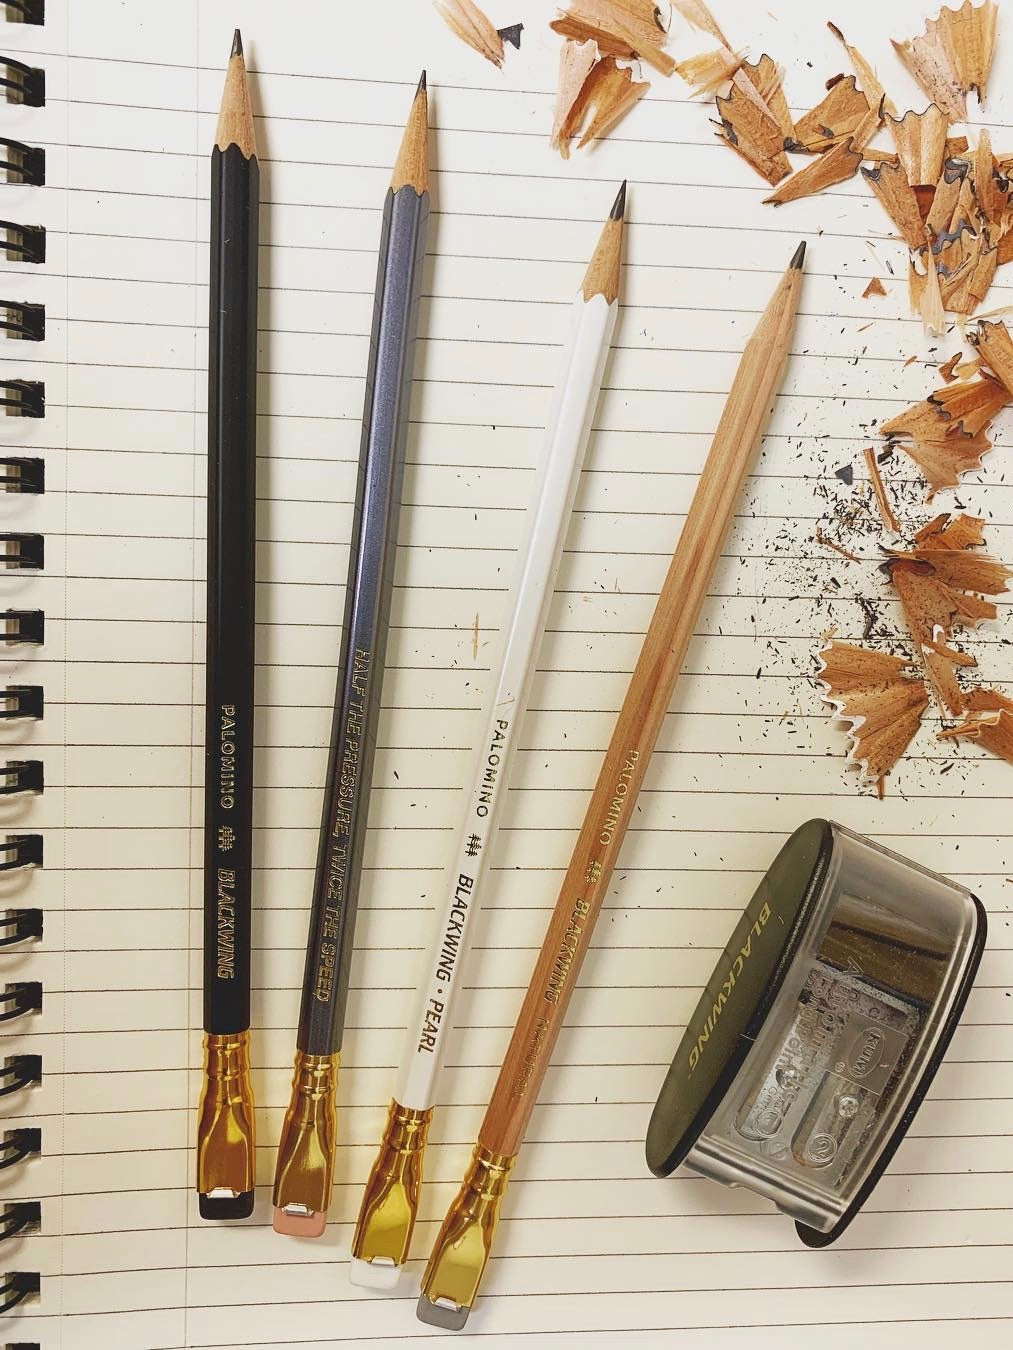 Blackwing Natural Pencils and a Palomino Blackwing pencil sharpener on a notebook.